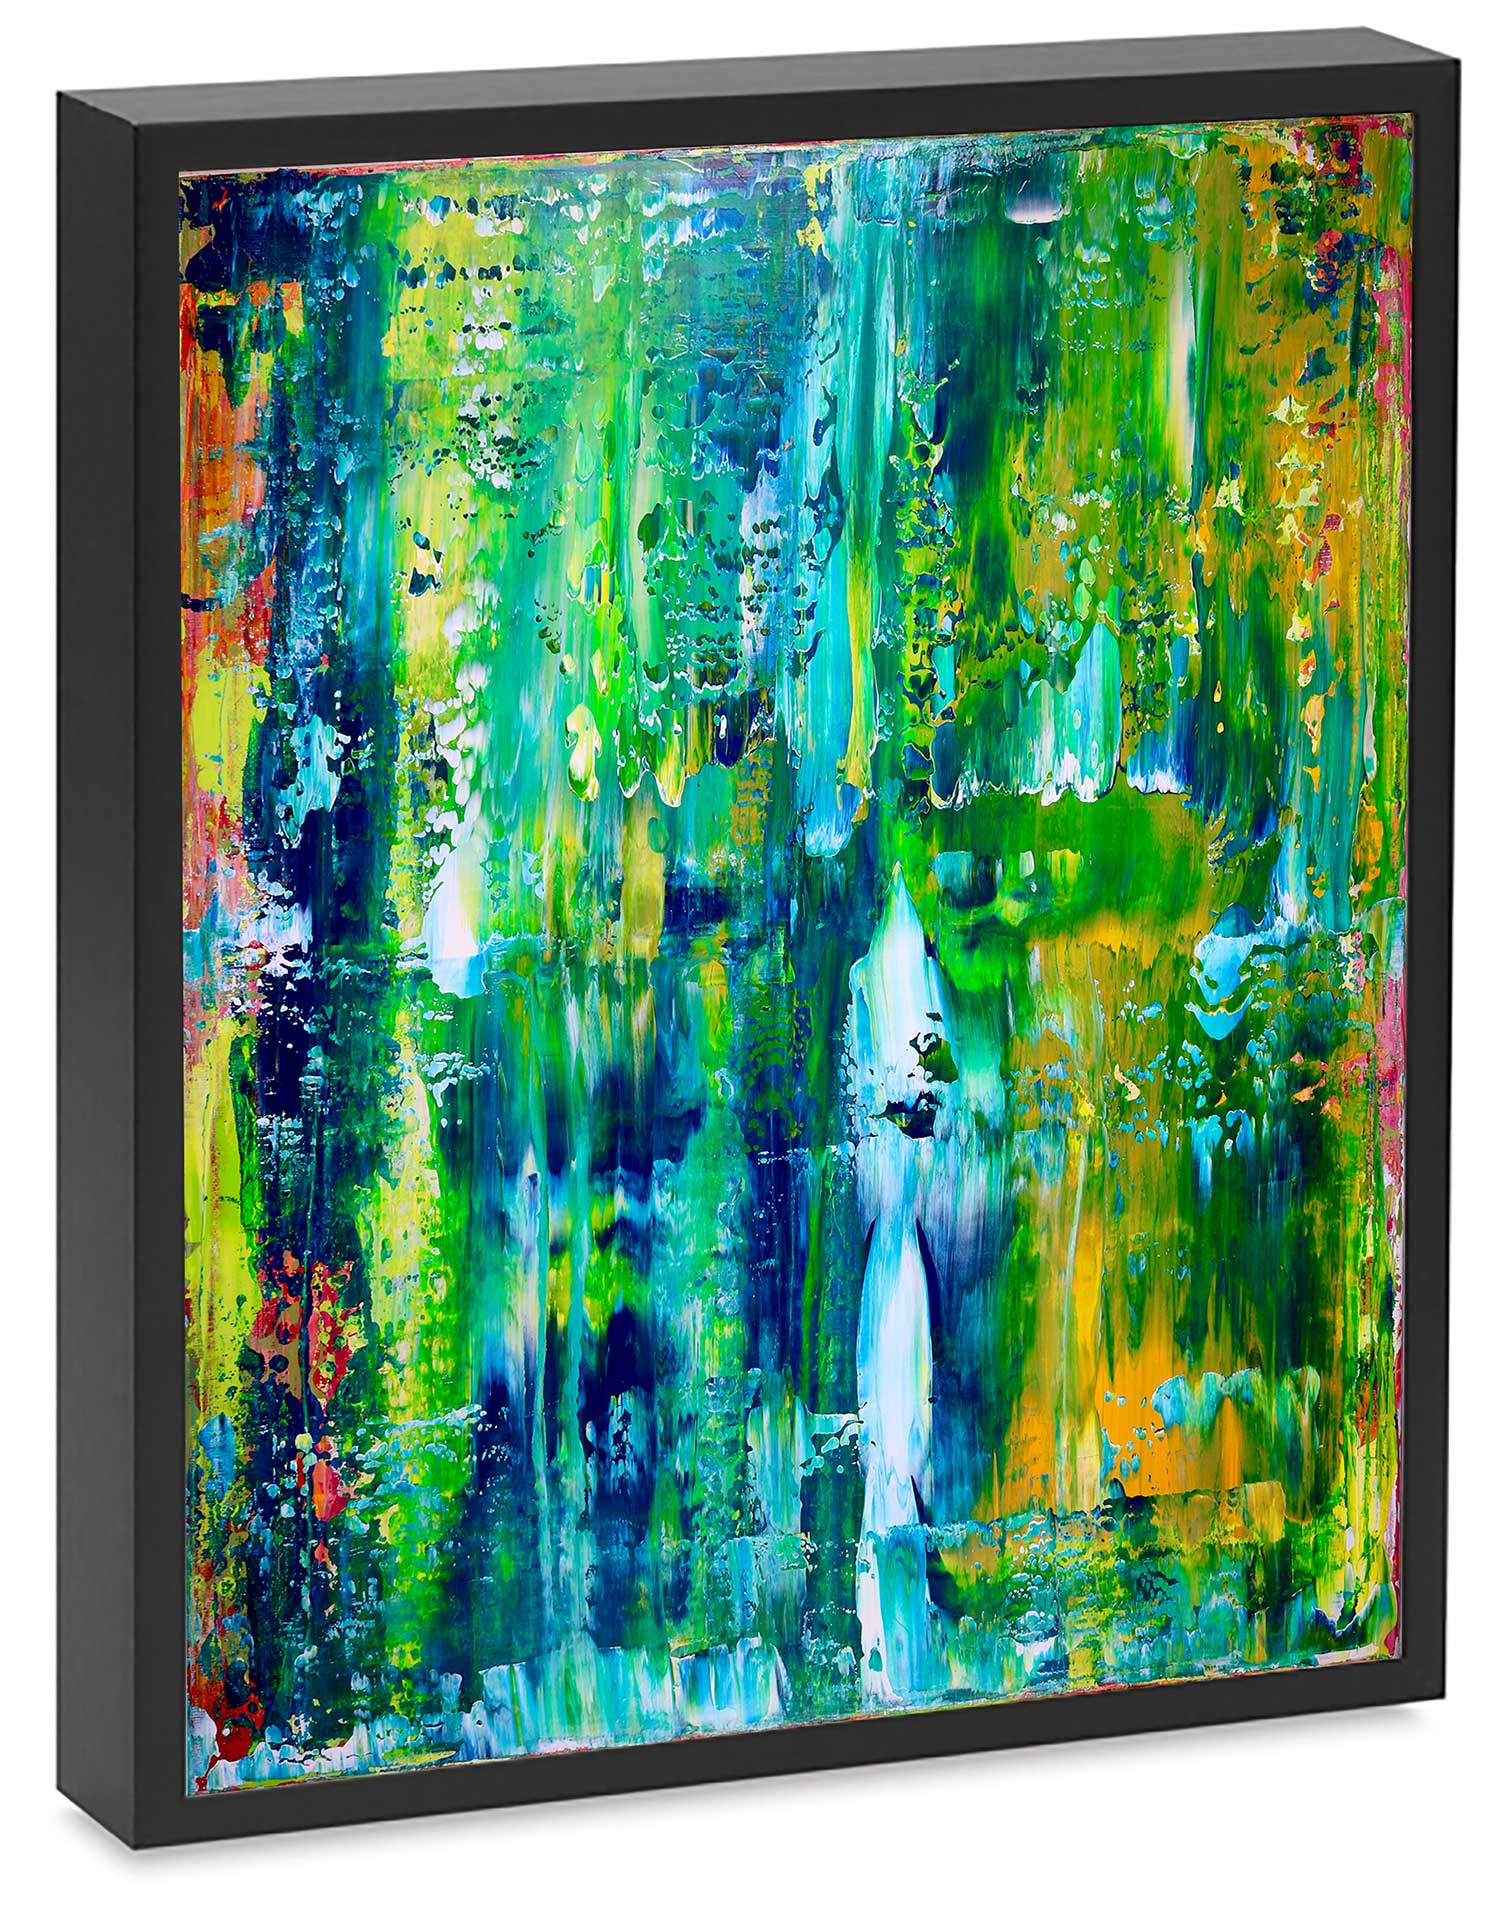 SOLD - Enchanted Spectra by Nestor Toro - Abstract artist